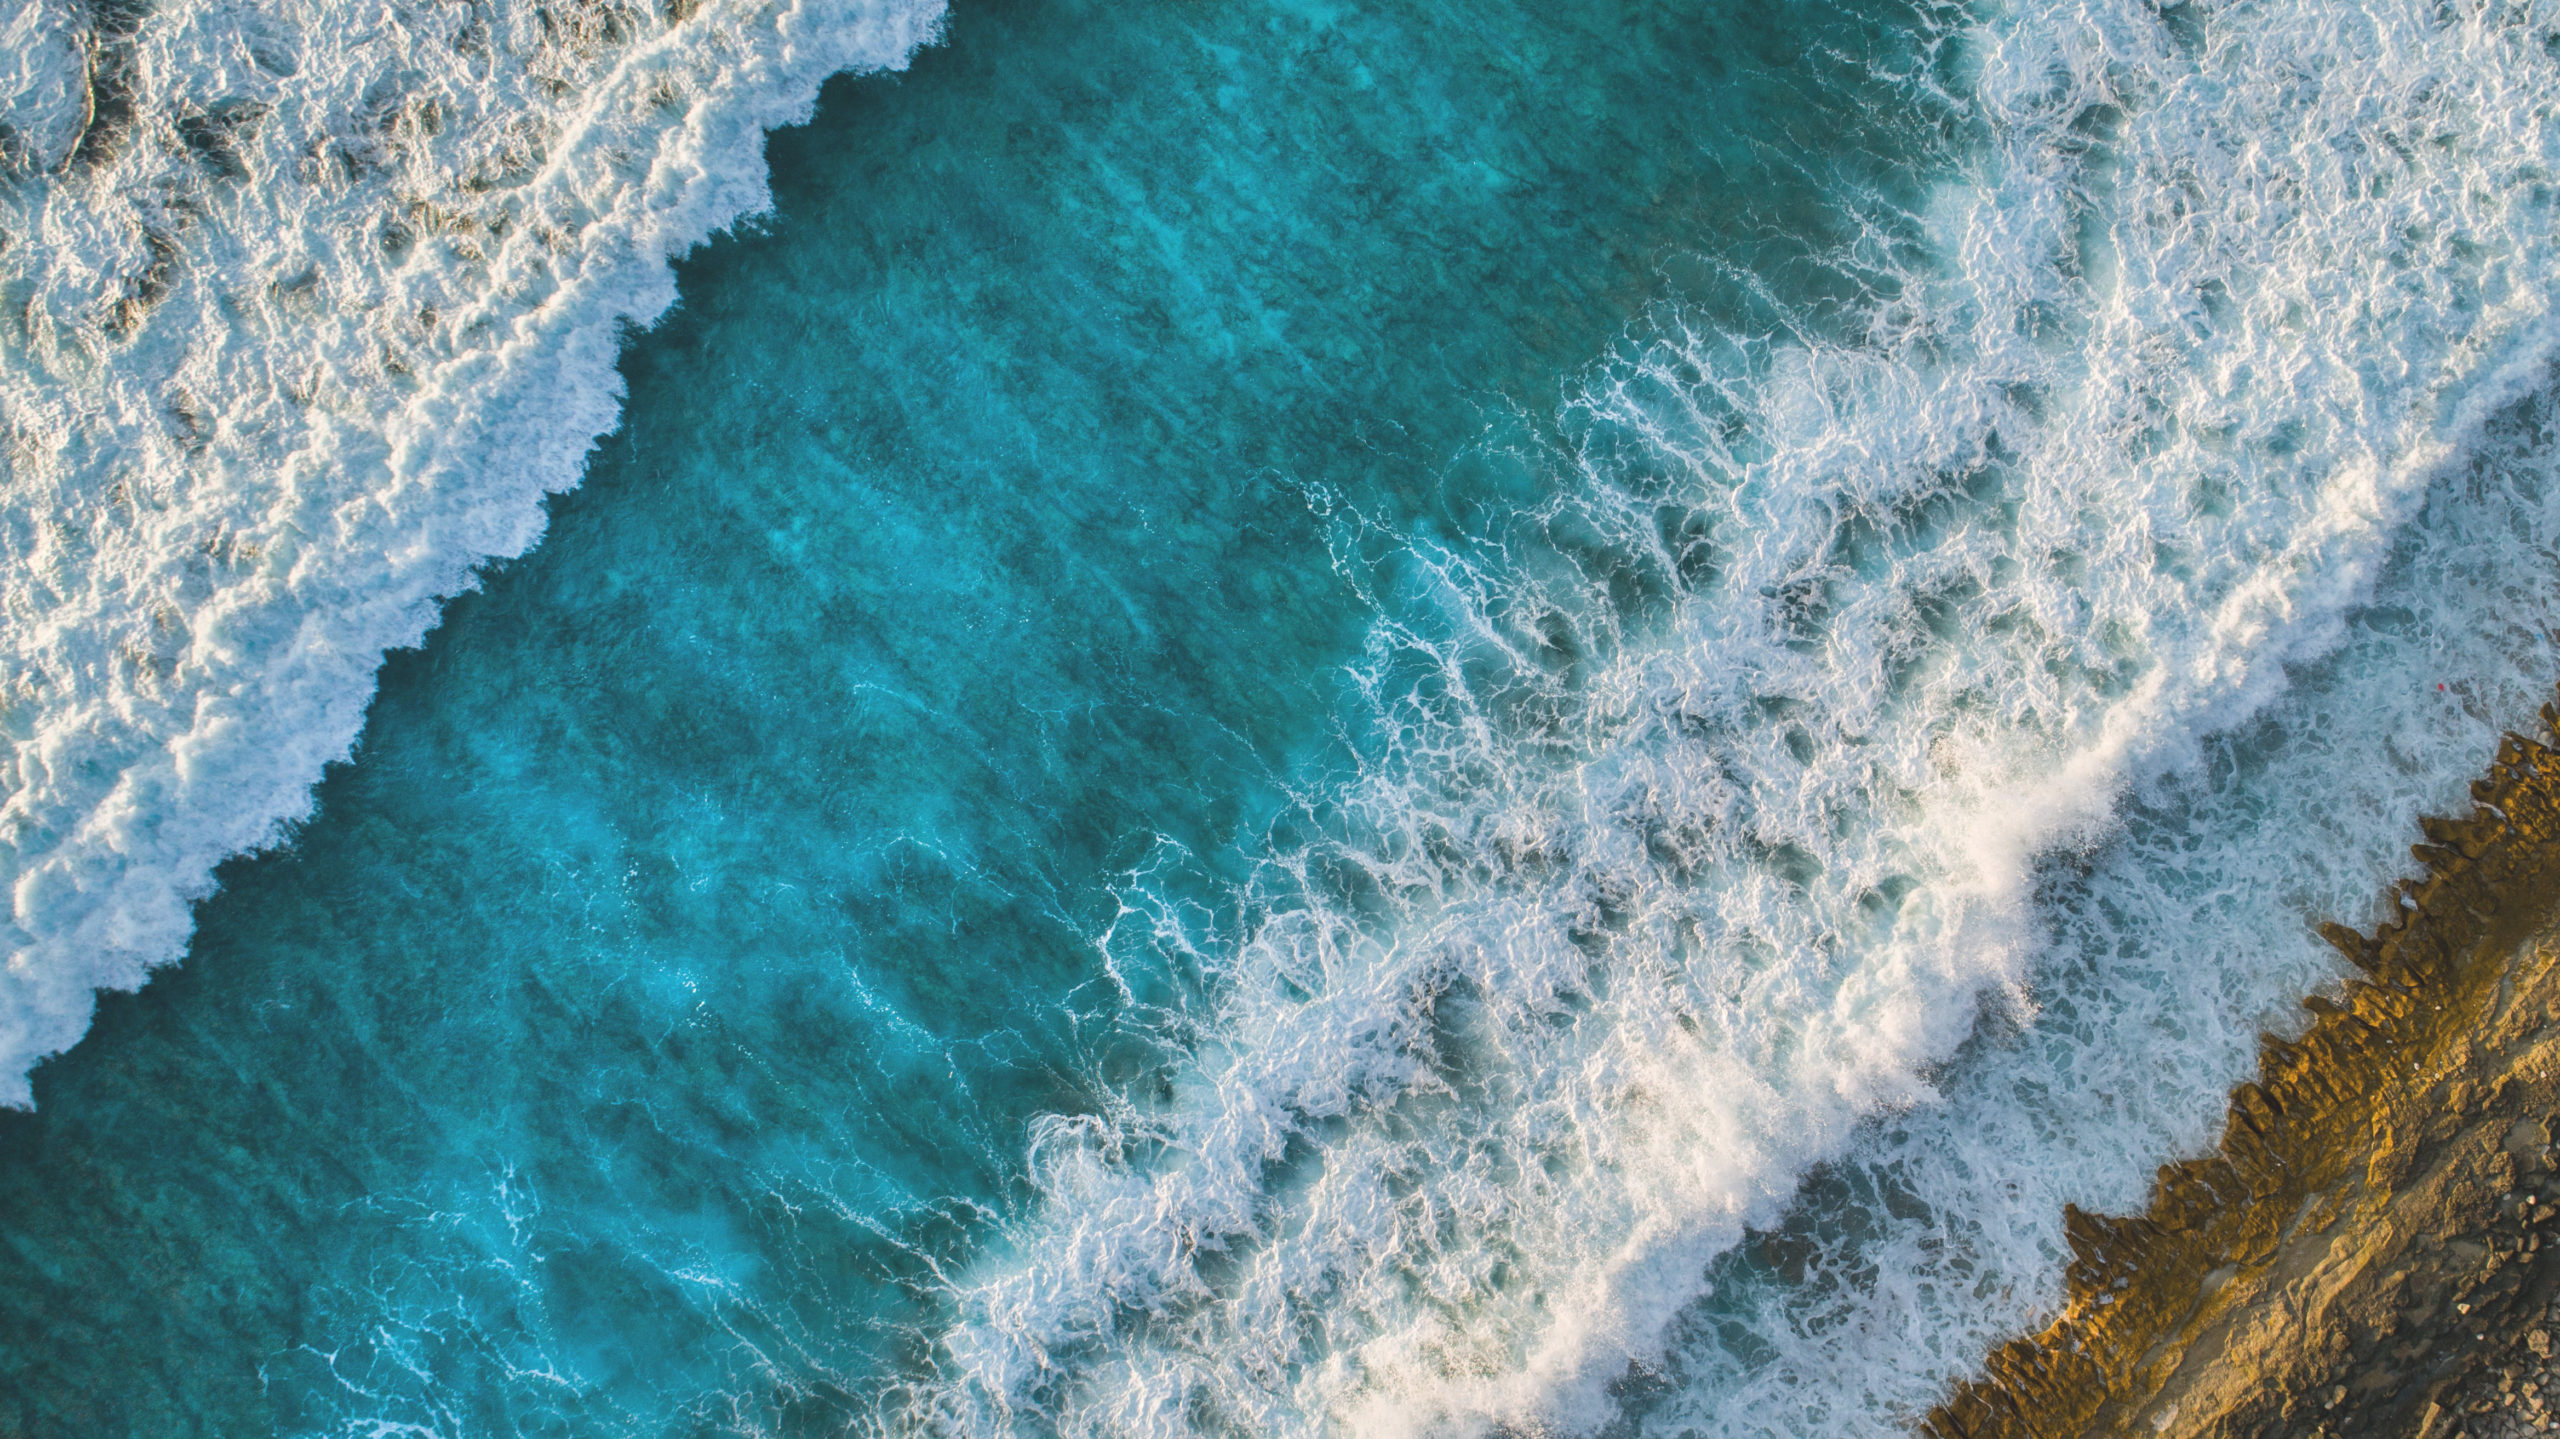 Aerial view of vibrant turquoise waves crashing onto a sandy beach